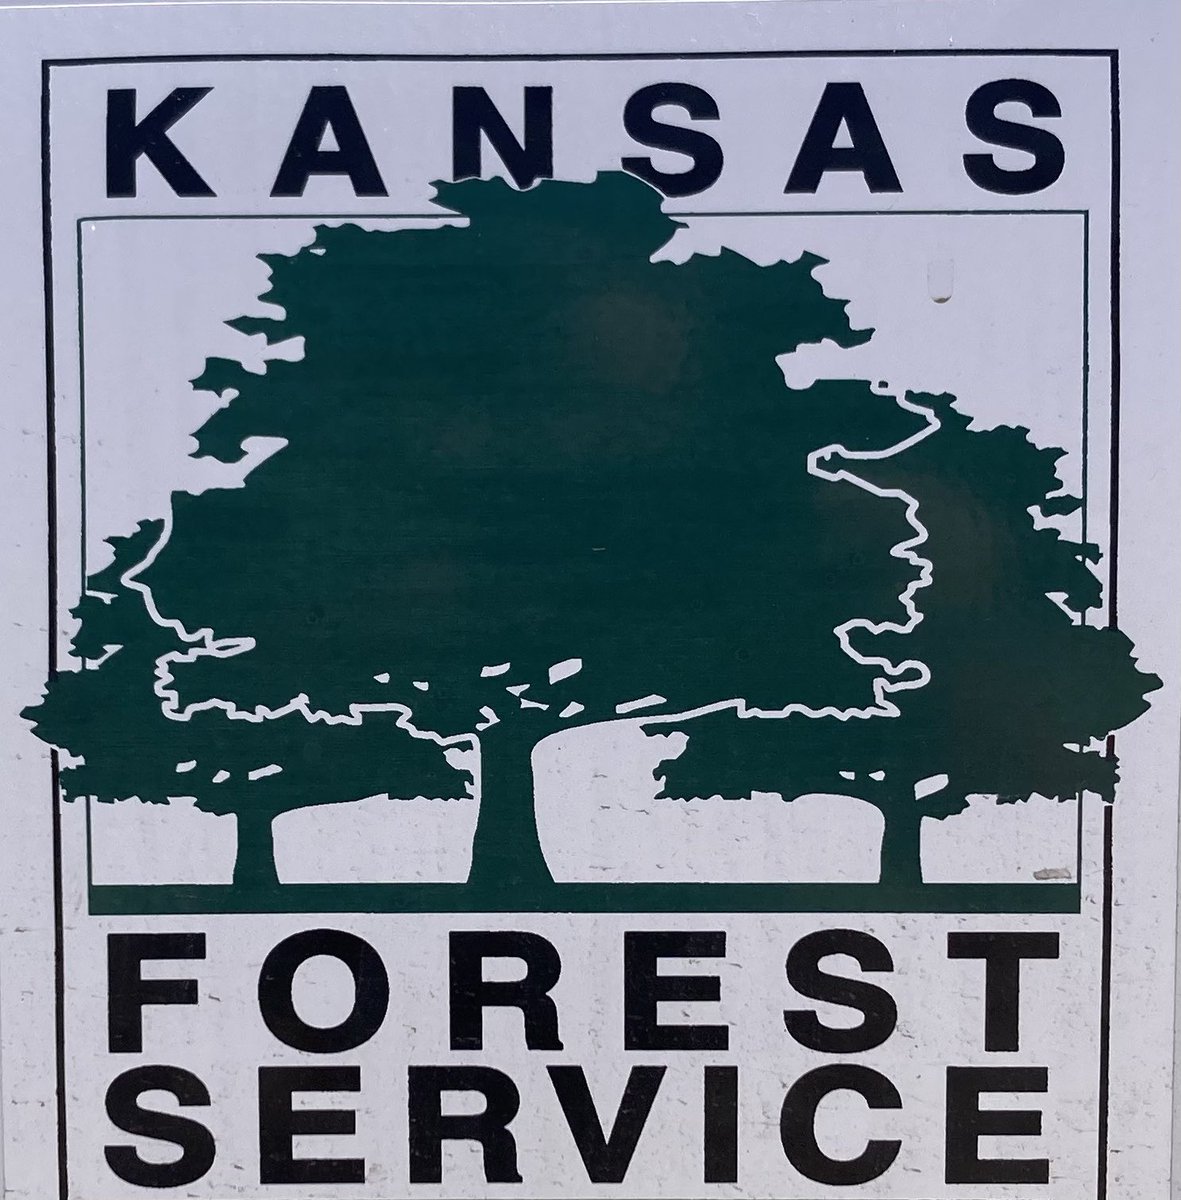 Met today with fellow #Treehuggers Tyler @lawrenceks and Kim @KSForestService. These tree experts are a great asset to our KU campus trees. Thanks! @UnivOfKansas #KUlovesTrees